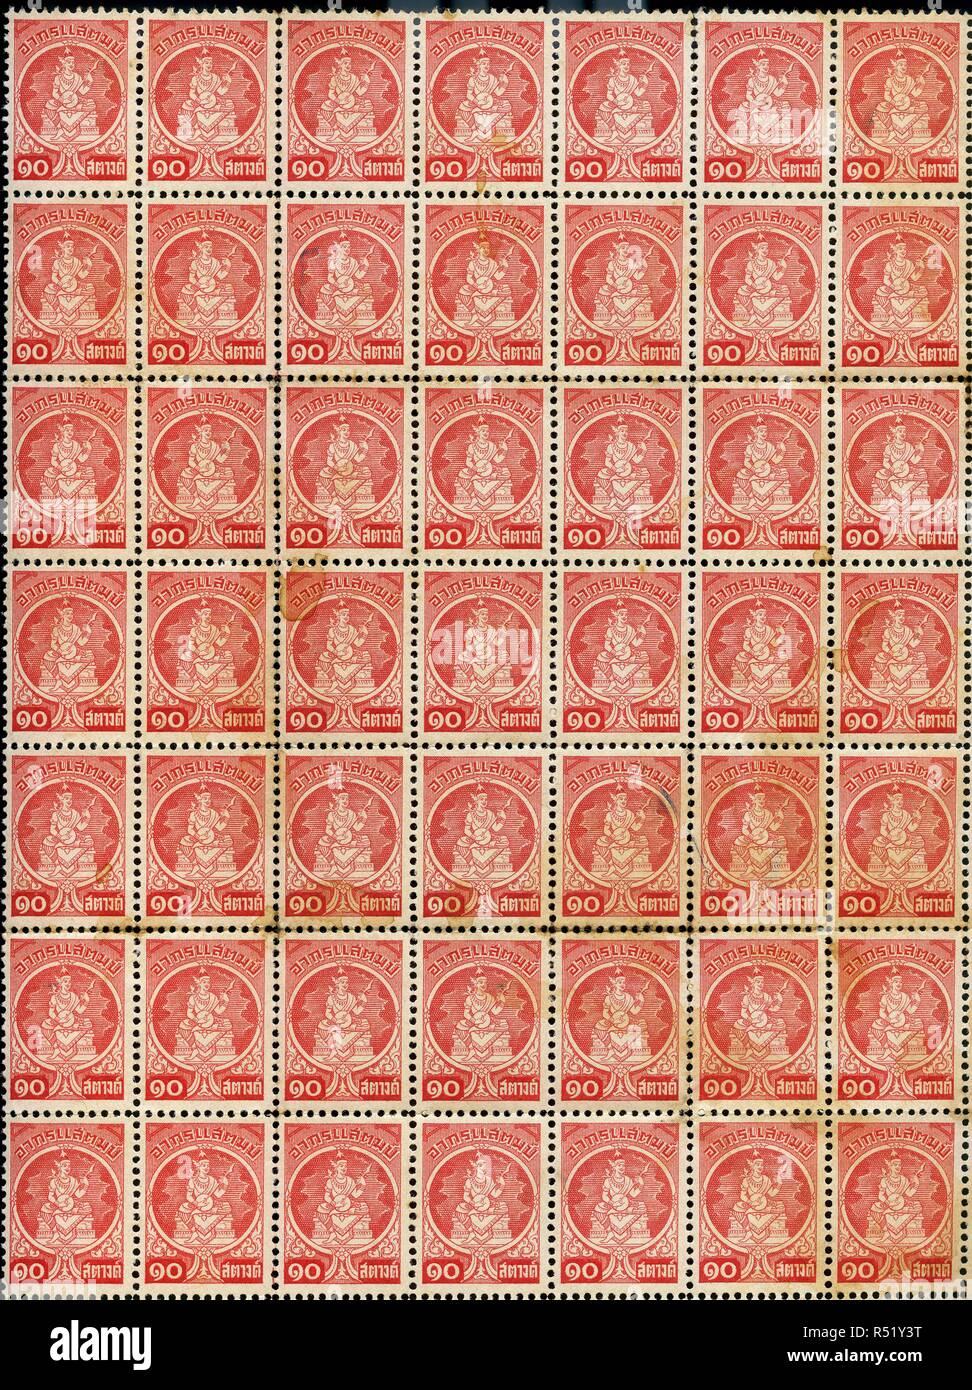 Siam General Revenue Stamp fifth Issue, 1946 10 satang 49 block. Stock Photo